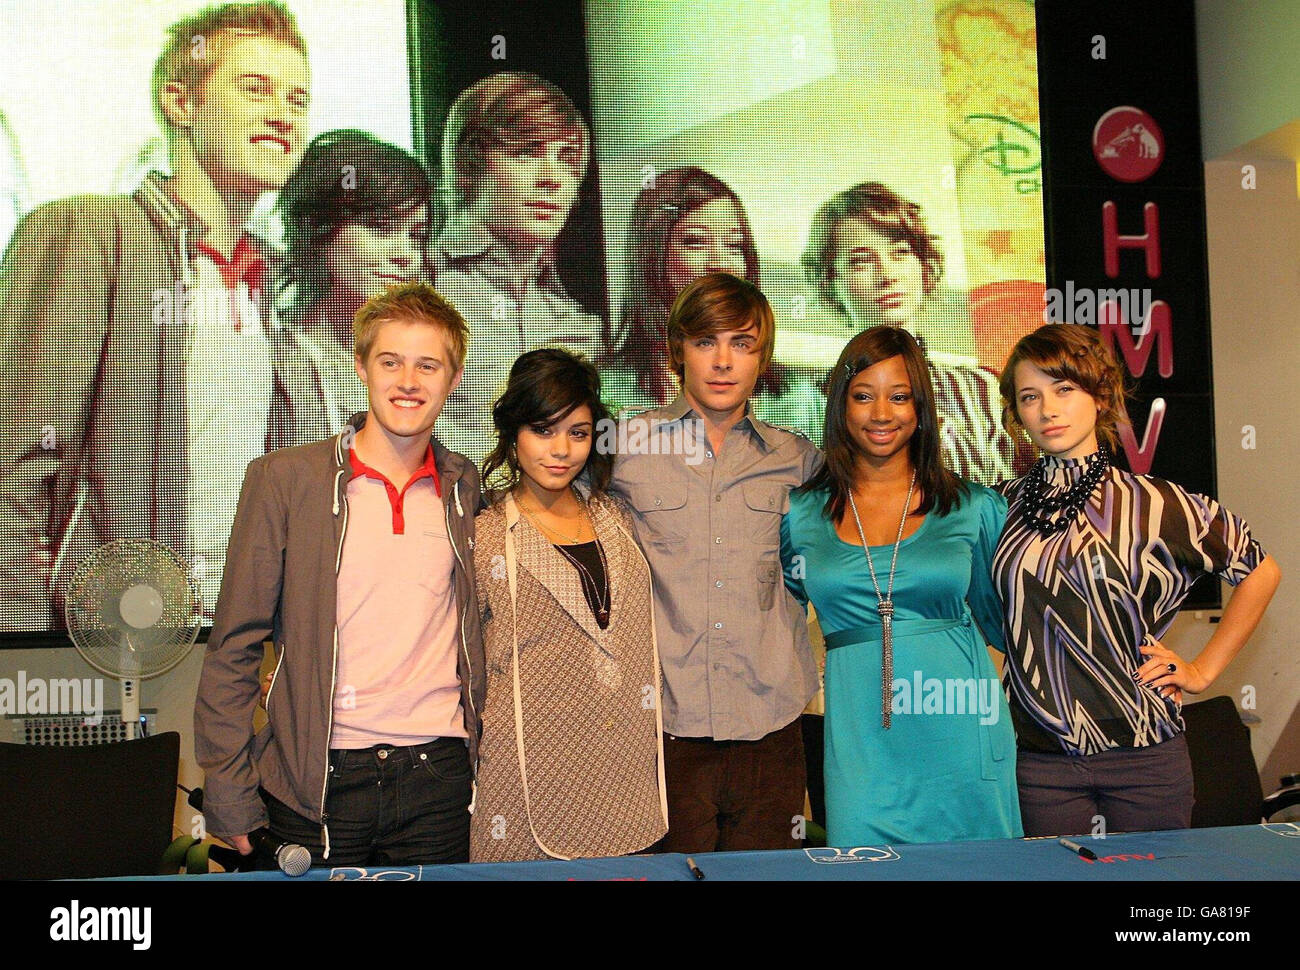 The stars of Disney's 'High School Musical' (left-right) Lucas Grabeel, Vanessa Hudgens, Zac Efron, Monique Coleman & Aleysa Rulin, attend a signing for their new DVD at HMV, central London. Stock Photo